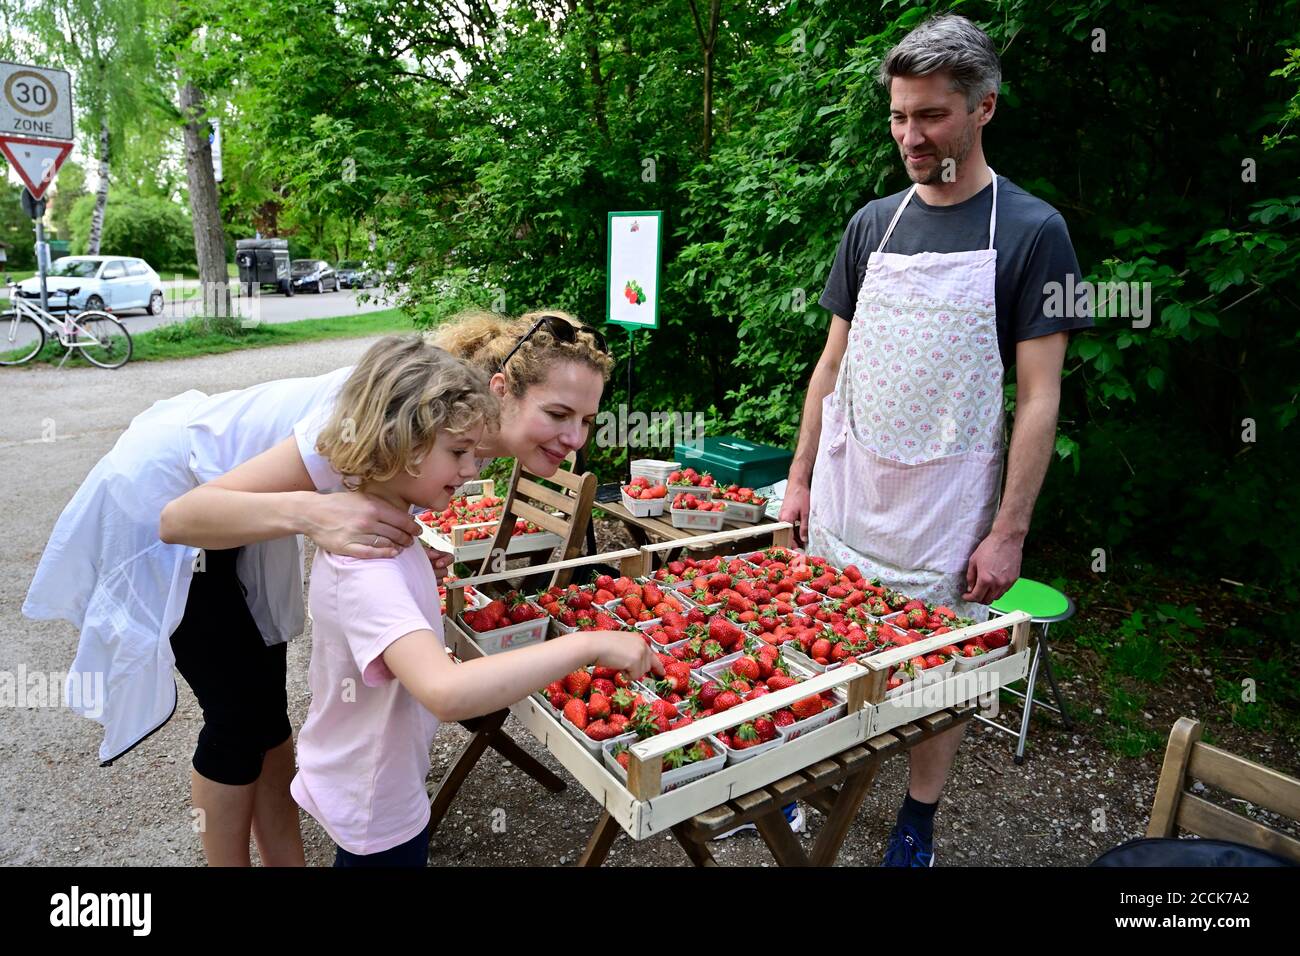 Male vendor looking at mother and daughter choosing strawberries at market stall Stock Photo